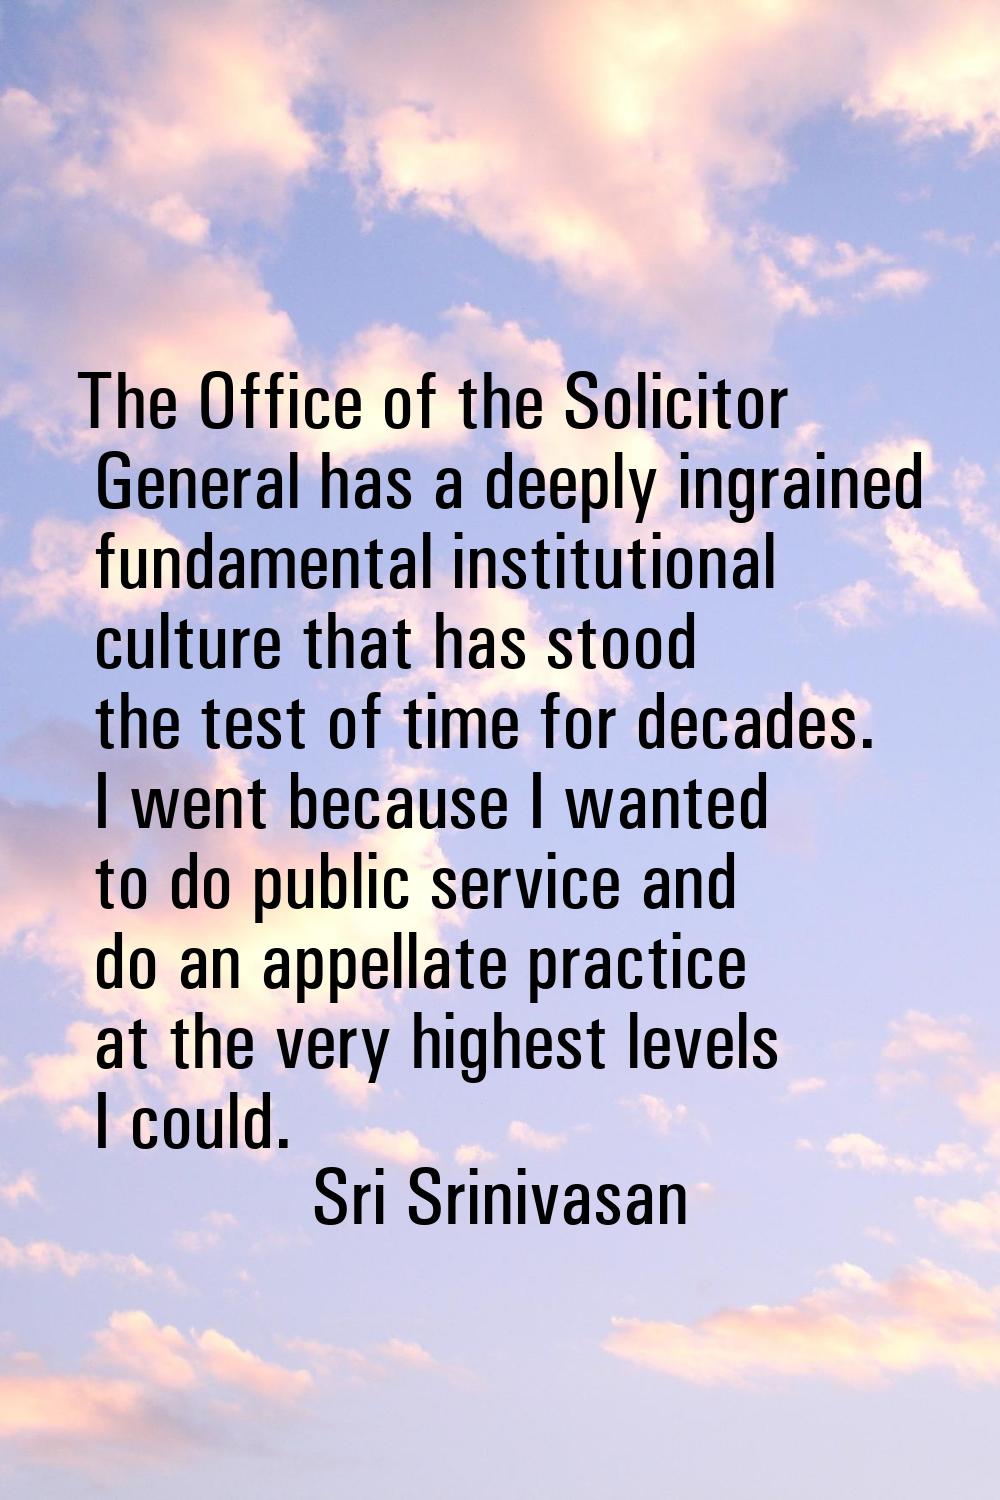 The Office of the Solicitor General has a deeply ingrained fundamental institutional culture that h